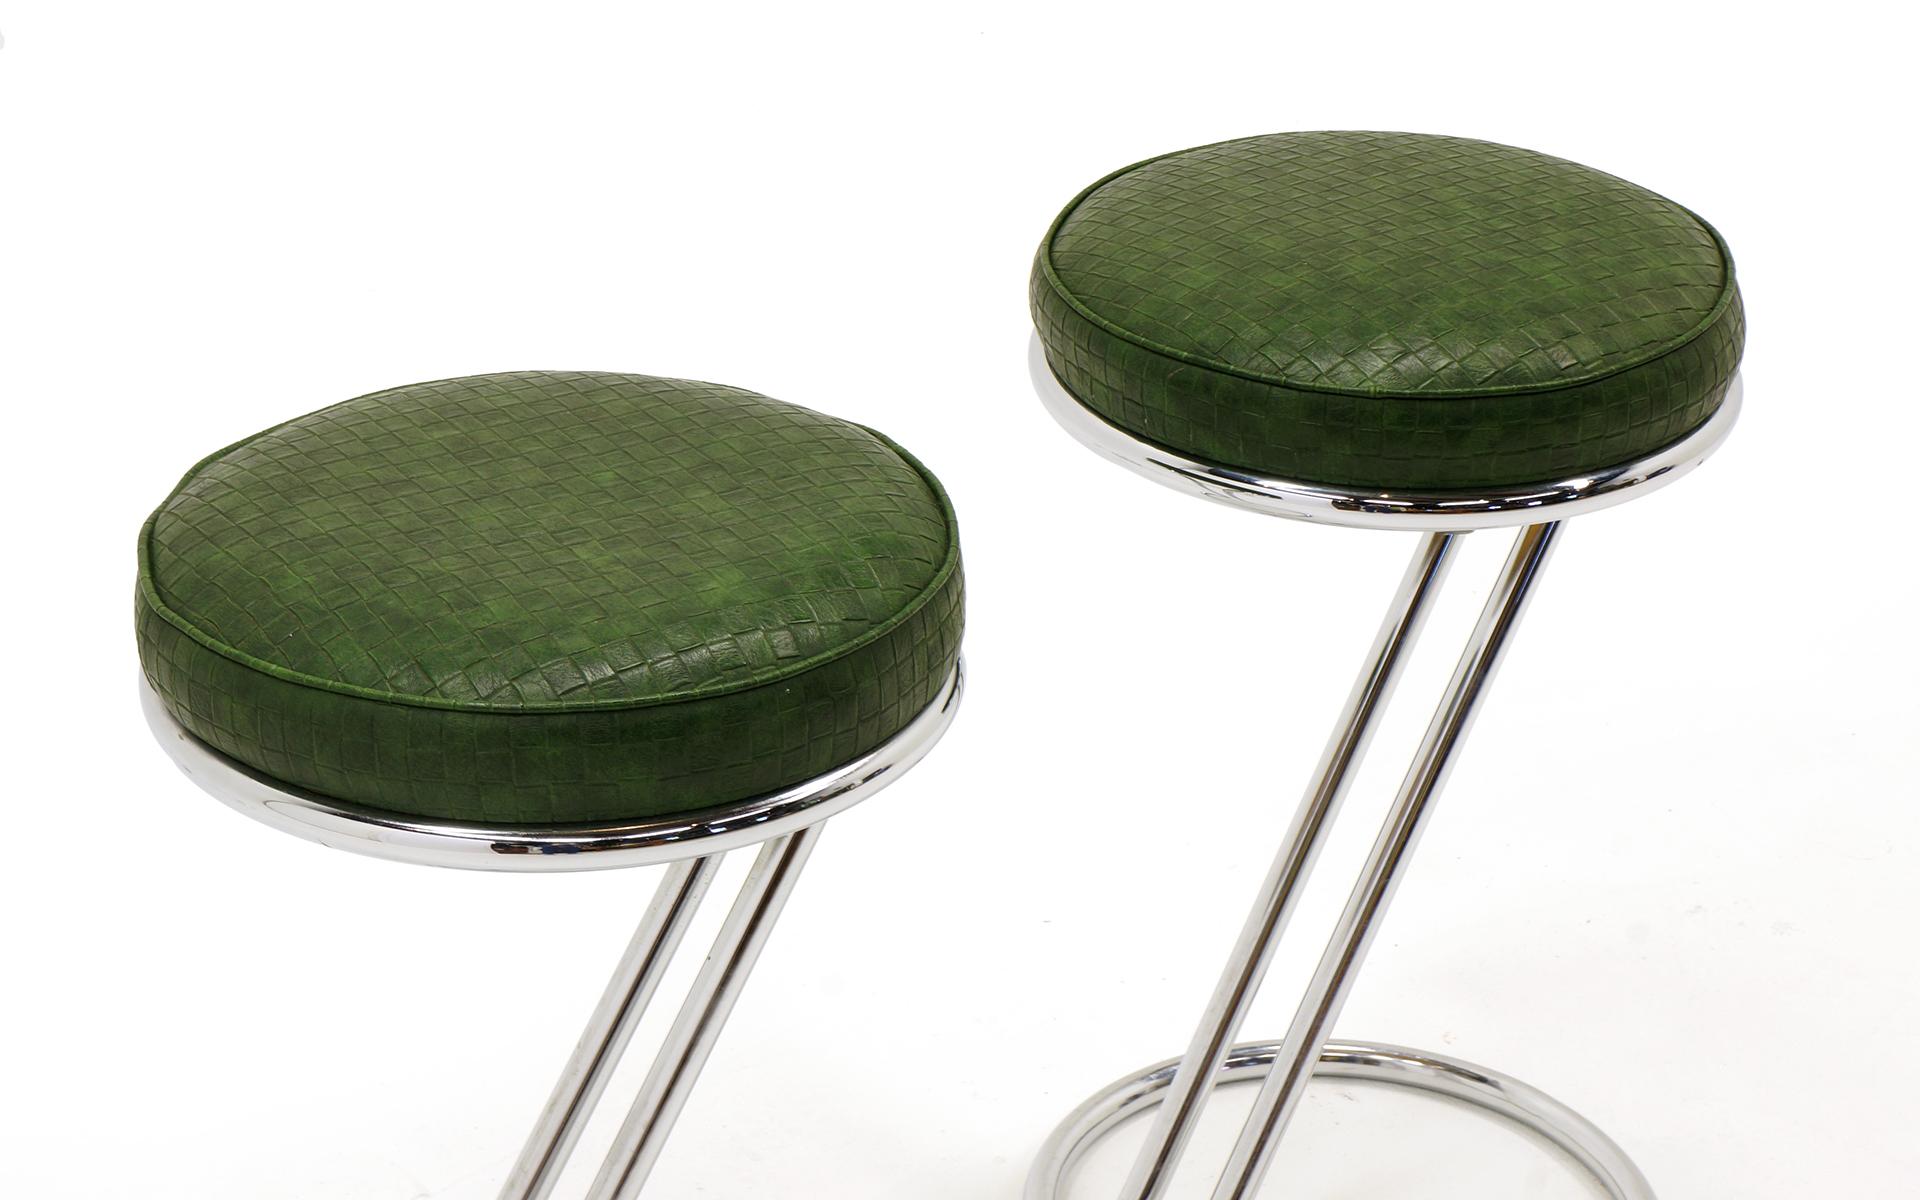 Pair of counter height bar stools designed by Gilbert Rohde for Troy Sunshade Co. Chrome frames with green faux alligator seats. Scuffs and some scratches to the chrome from use, but no pitting at all and the seats are perfect. Signed on the inside